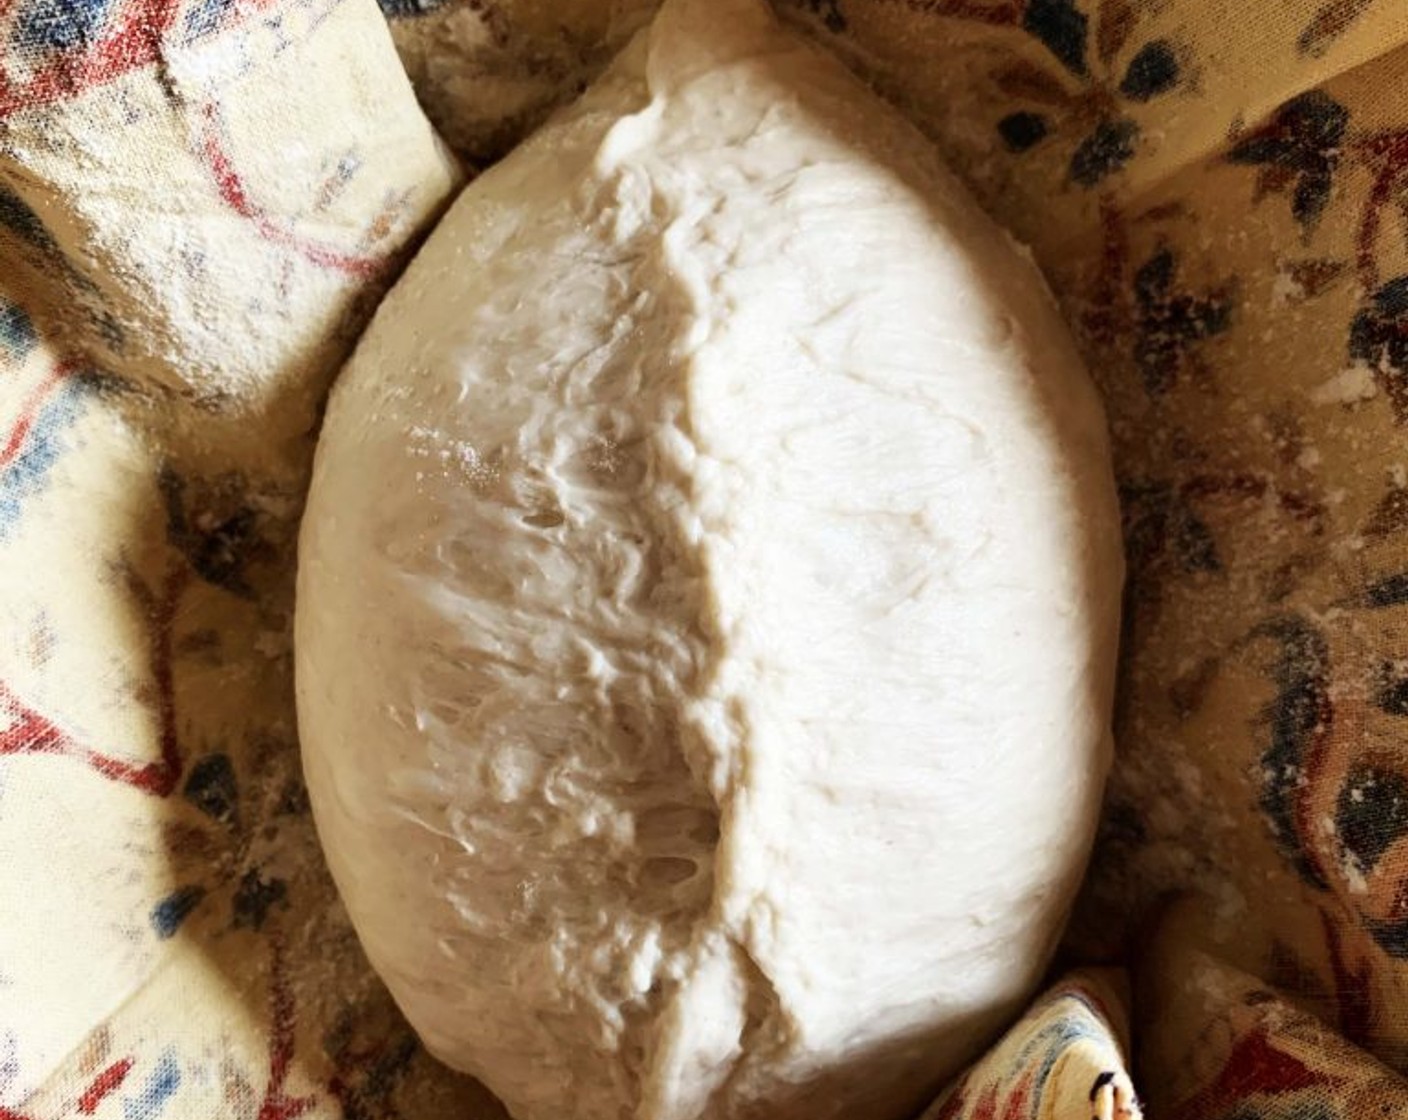 step 7 Last proceed with giving the dough a round shape, sealing it well. Place it sealed up into a basket lined with a floured towel. Cover with plastic wrap and let double in size at room temperature. Then move it in your fridge overnight.